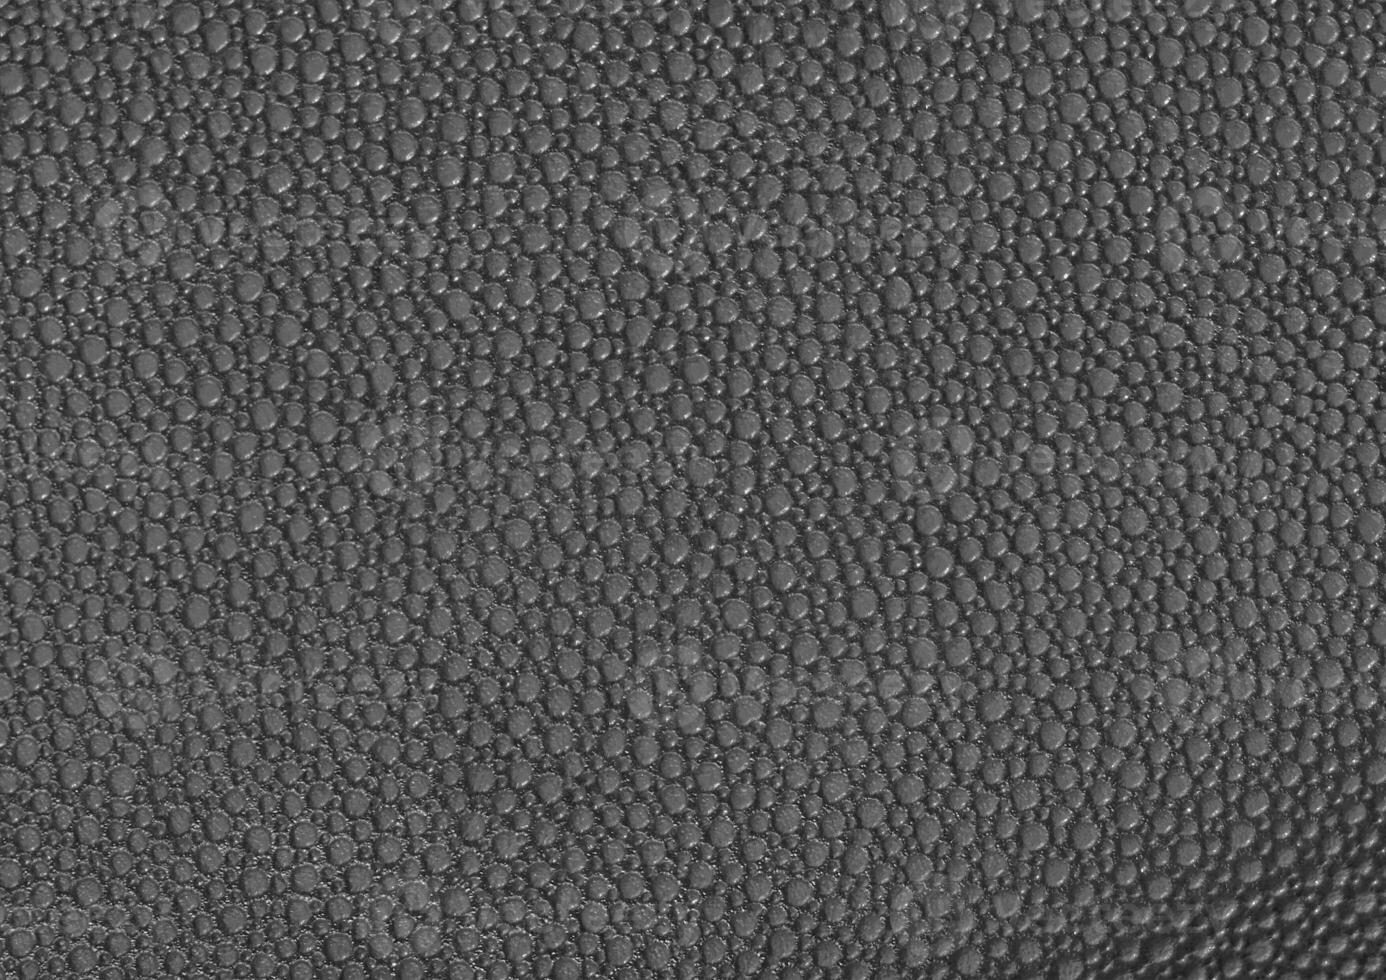 Black and white cloth pattern close view, textile material background photo